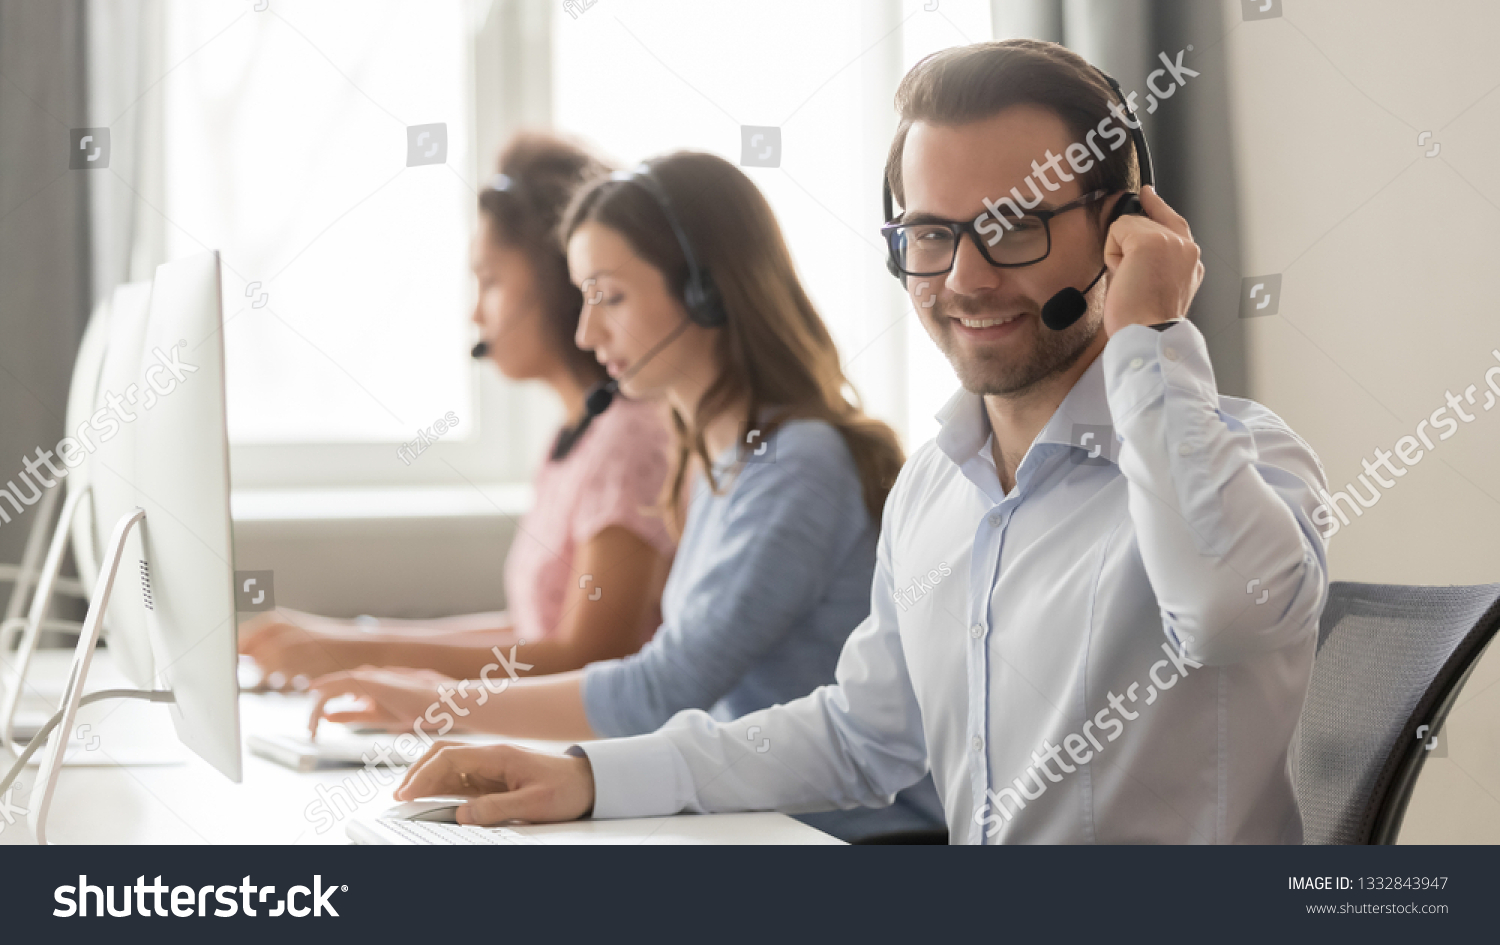 Smiling male call center operator in wireless headset with microphone looking at camera at workplace, businessman agent telemarketer work in customer service helpline support team office, portrait #1332843947